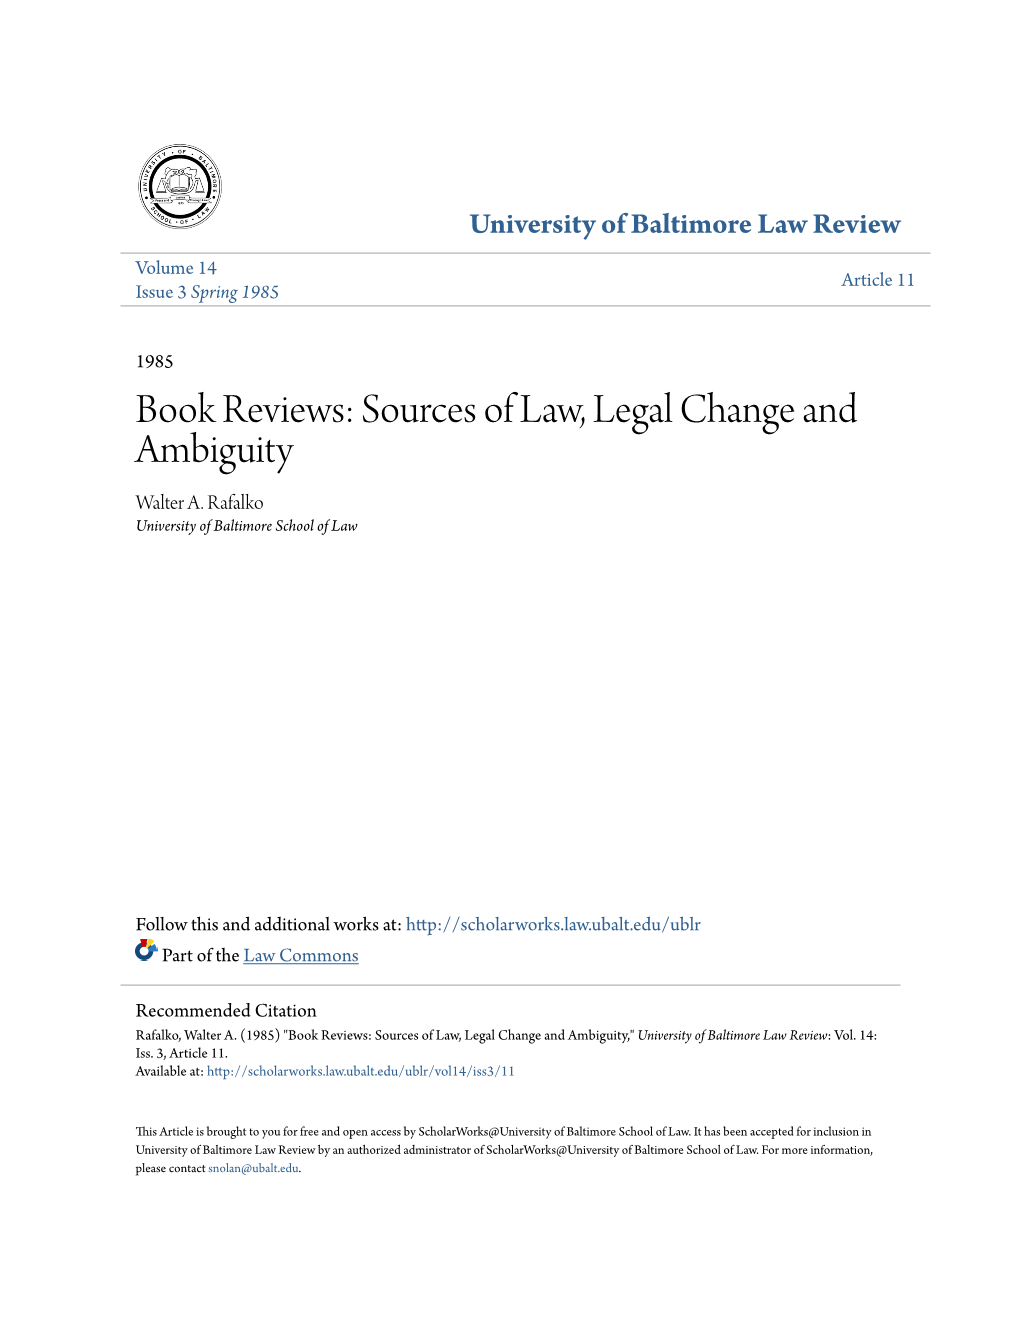 Sources of Law, Legal Change and Ambiguity Walter A